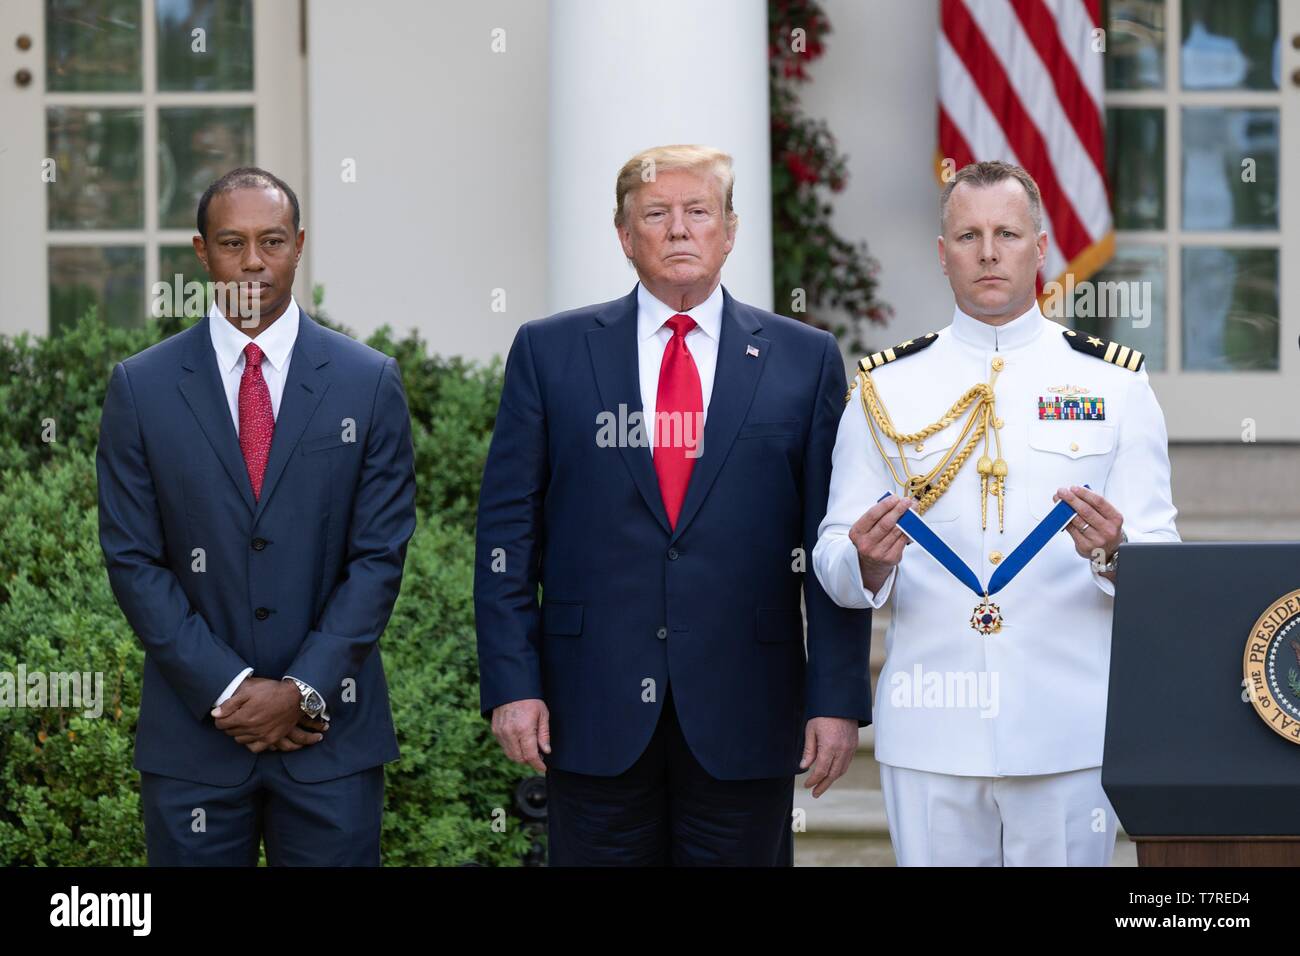 U.S President Donald Trump stands with golfer Tiger Woods during the presentation of the Presidential Medal of Freedom in the Rose Garden of the White House May 6, 2019 in Washington, DC. Stock Photo